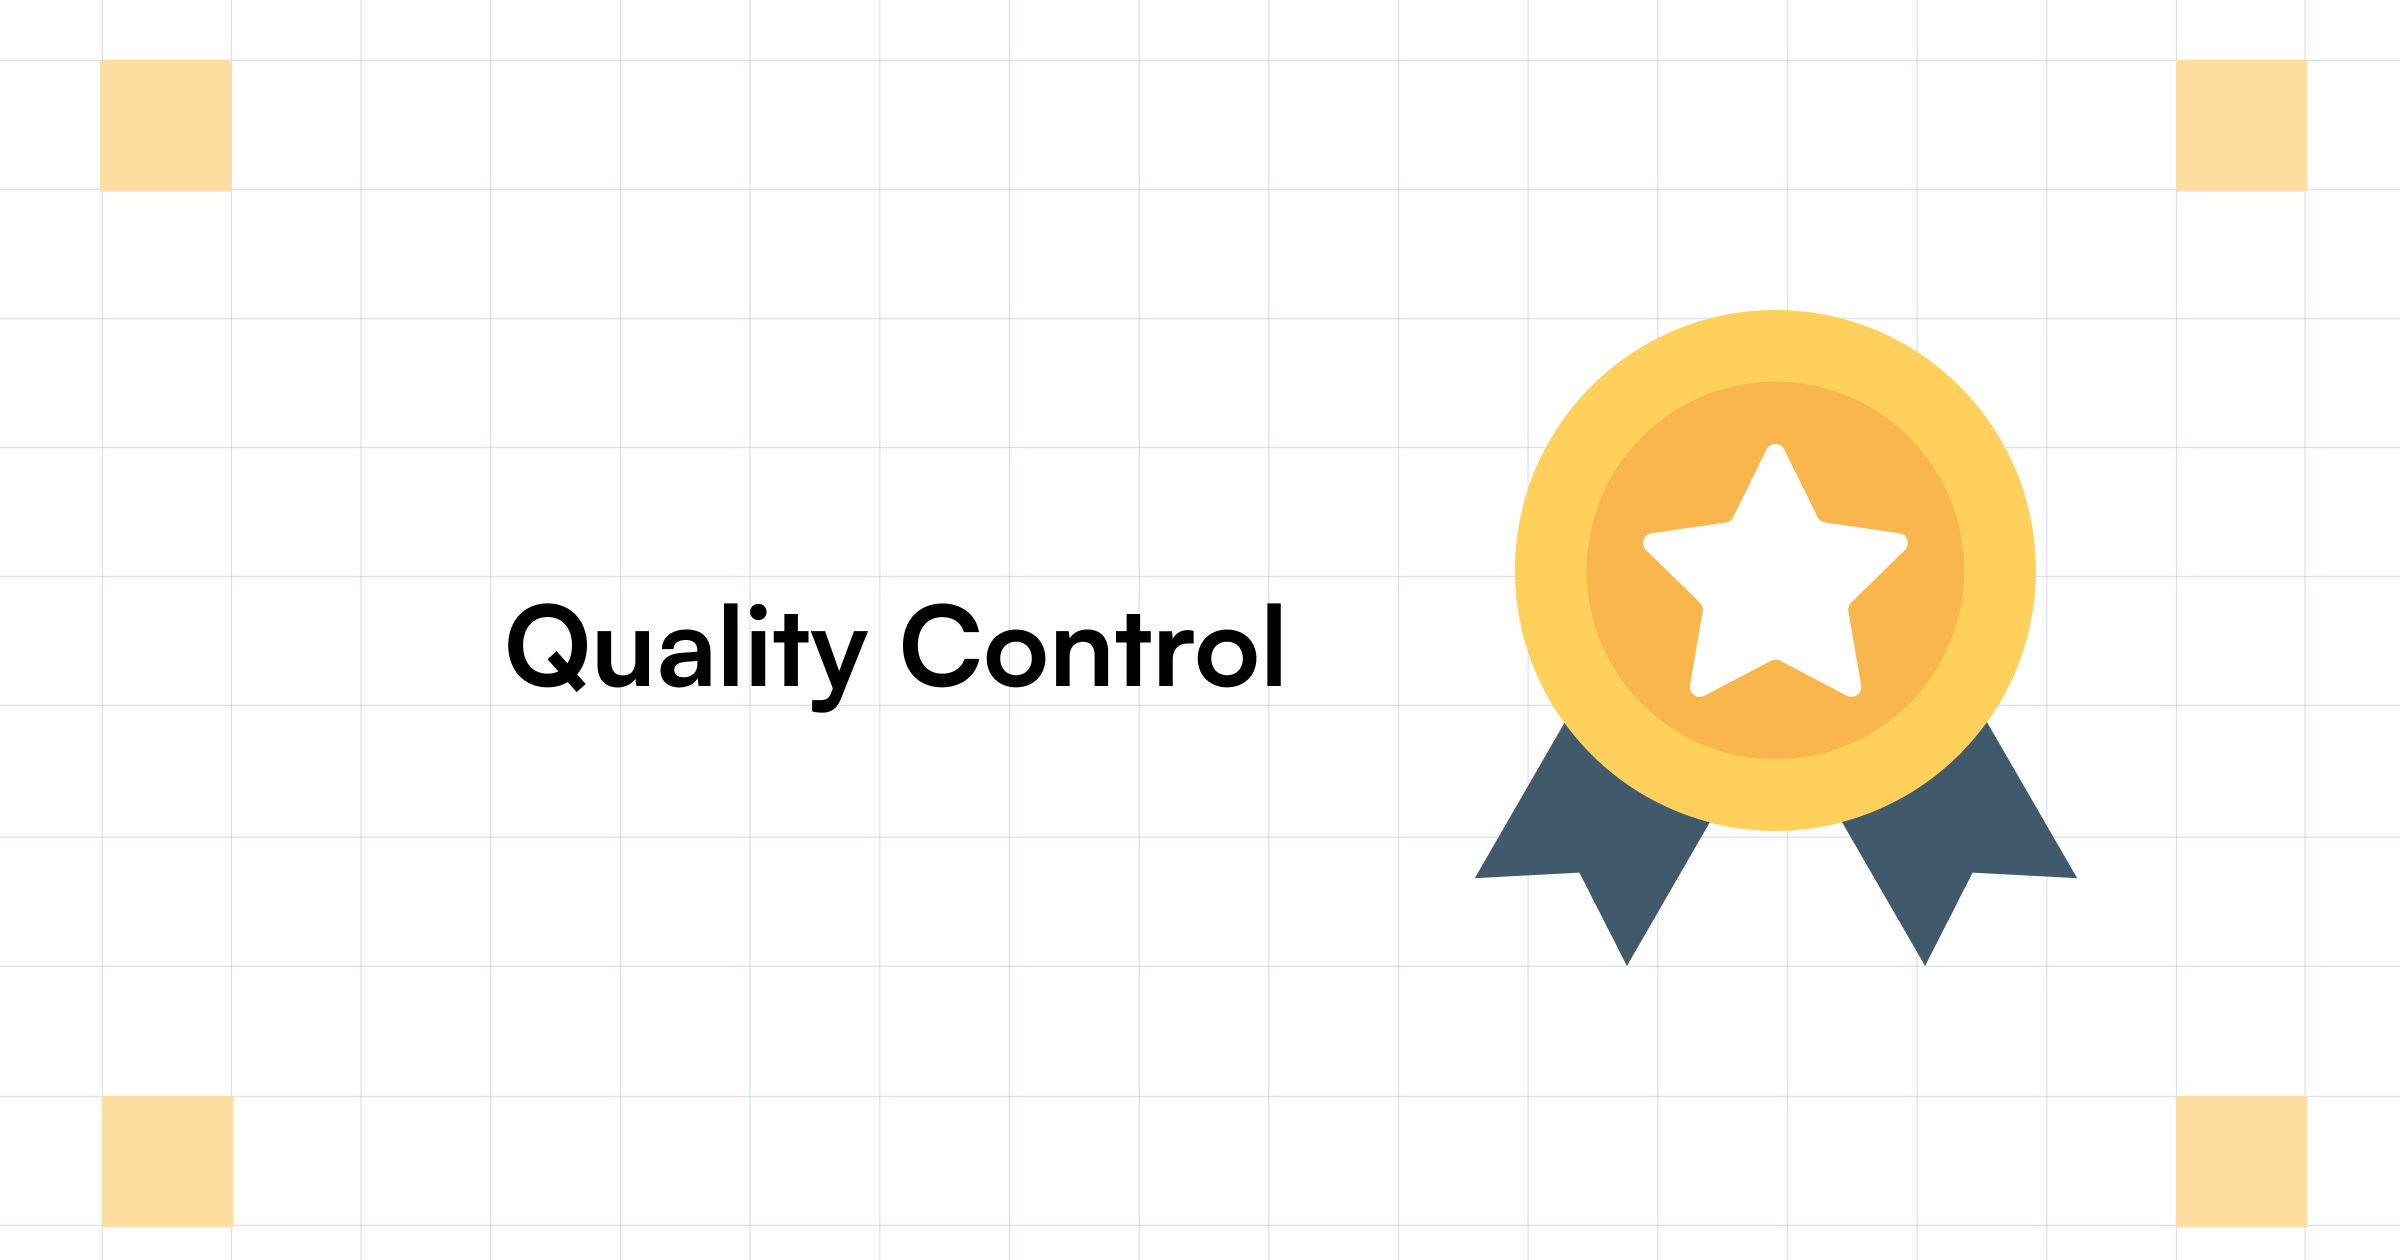 Quality Control What It Is and How It Works